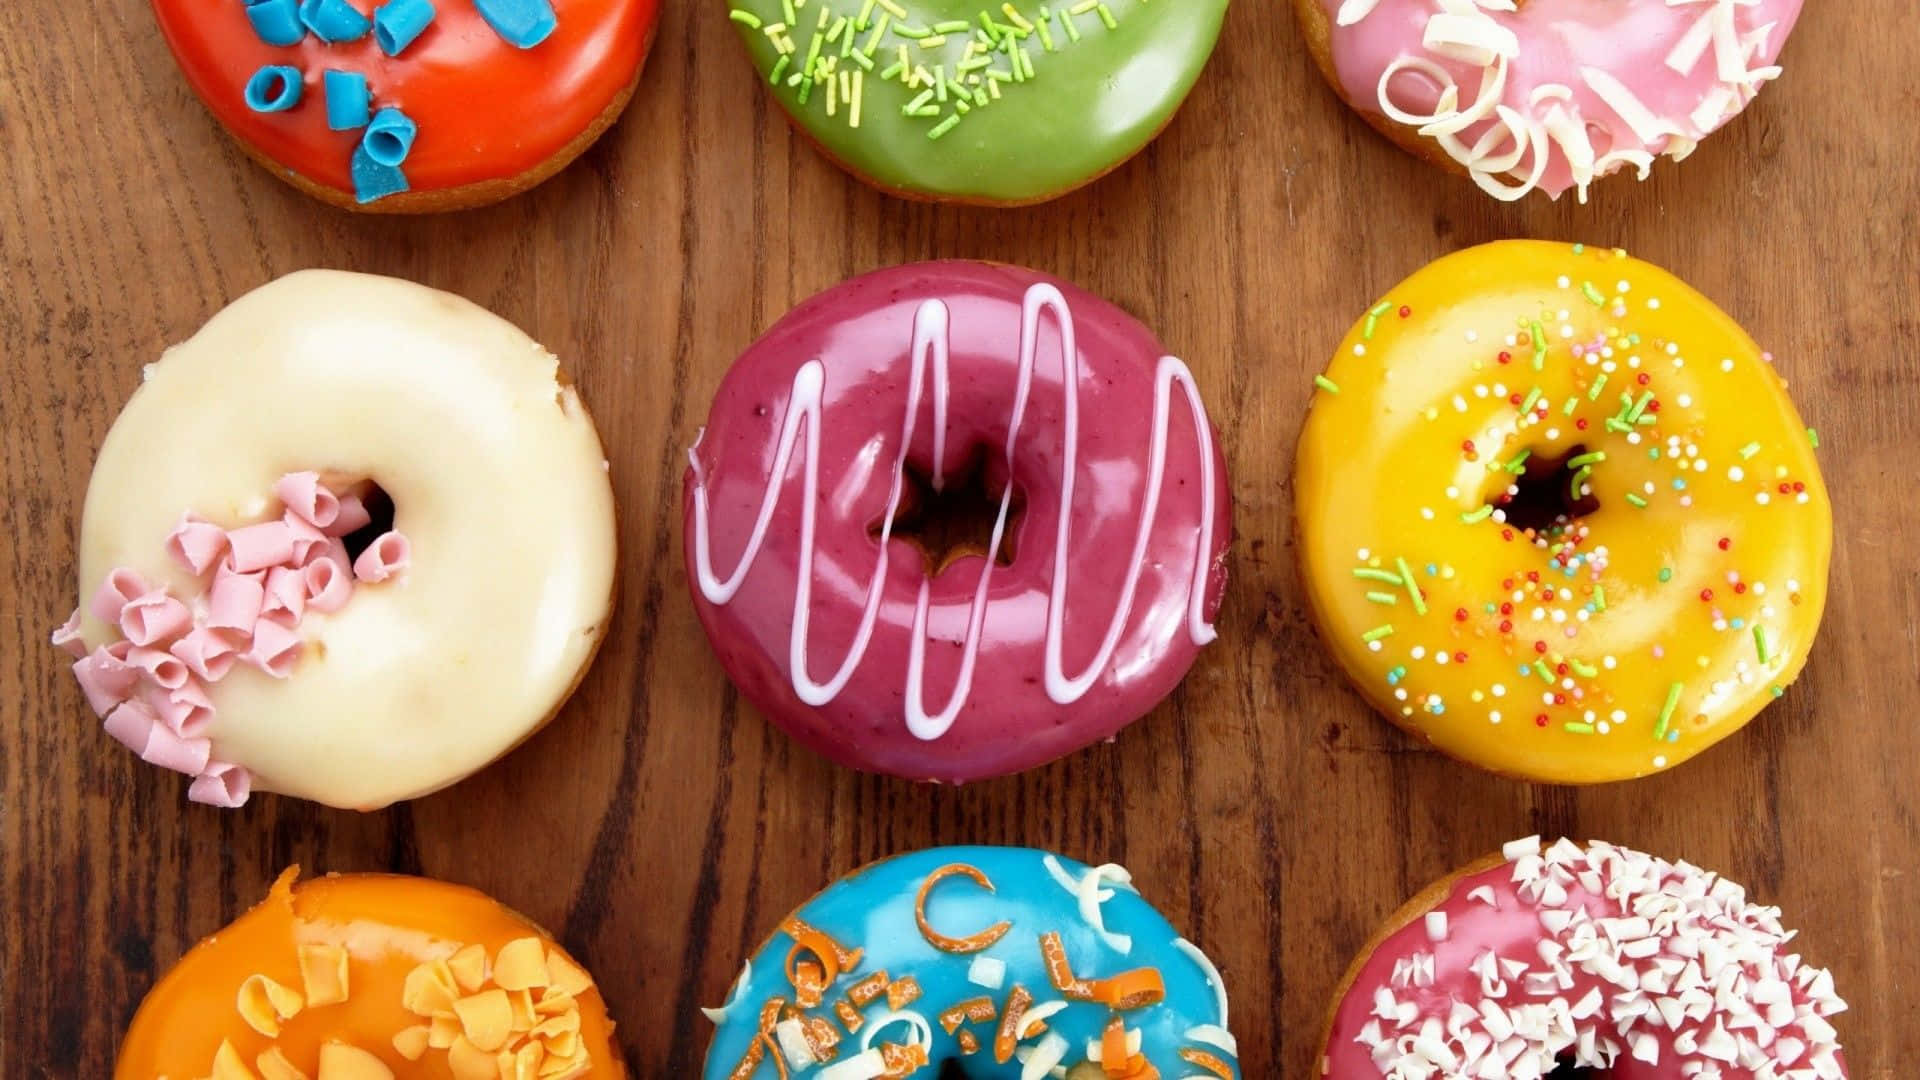 Delicious, mouth-watering donuts.